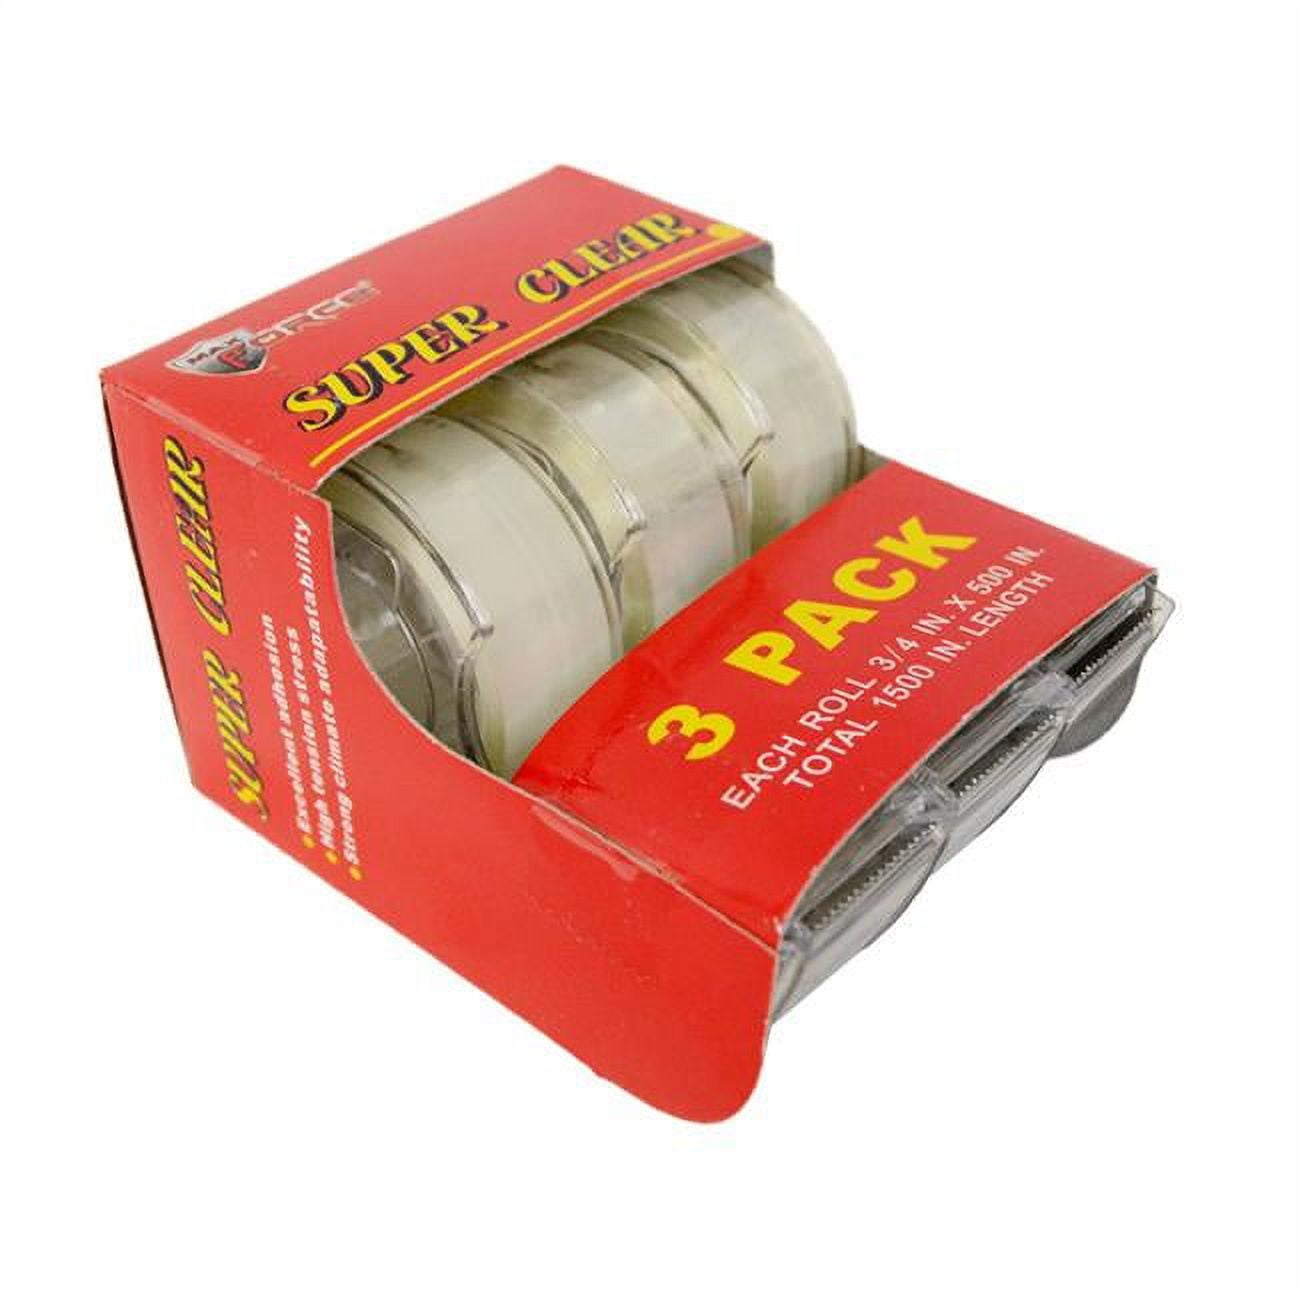 9017053 0.75 X 500 In. Max Force Tape, Clear - Case Of 24